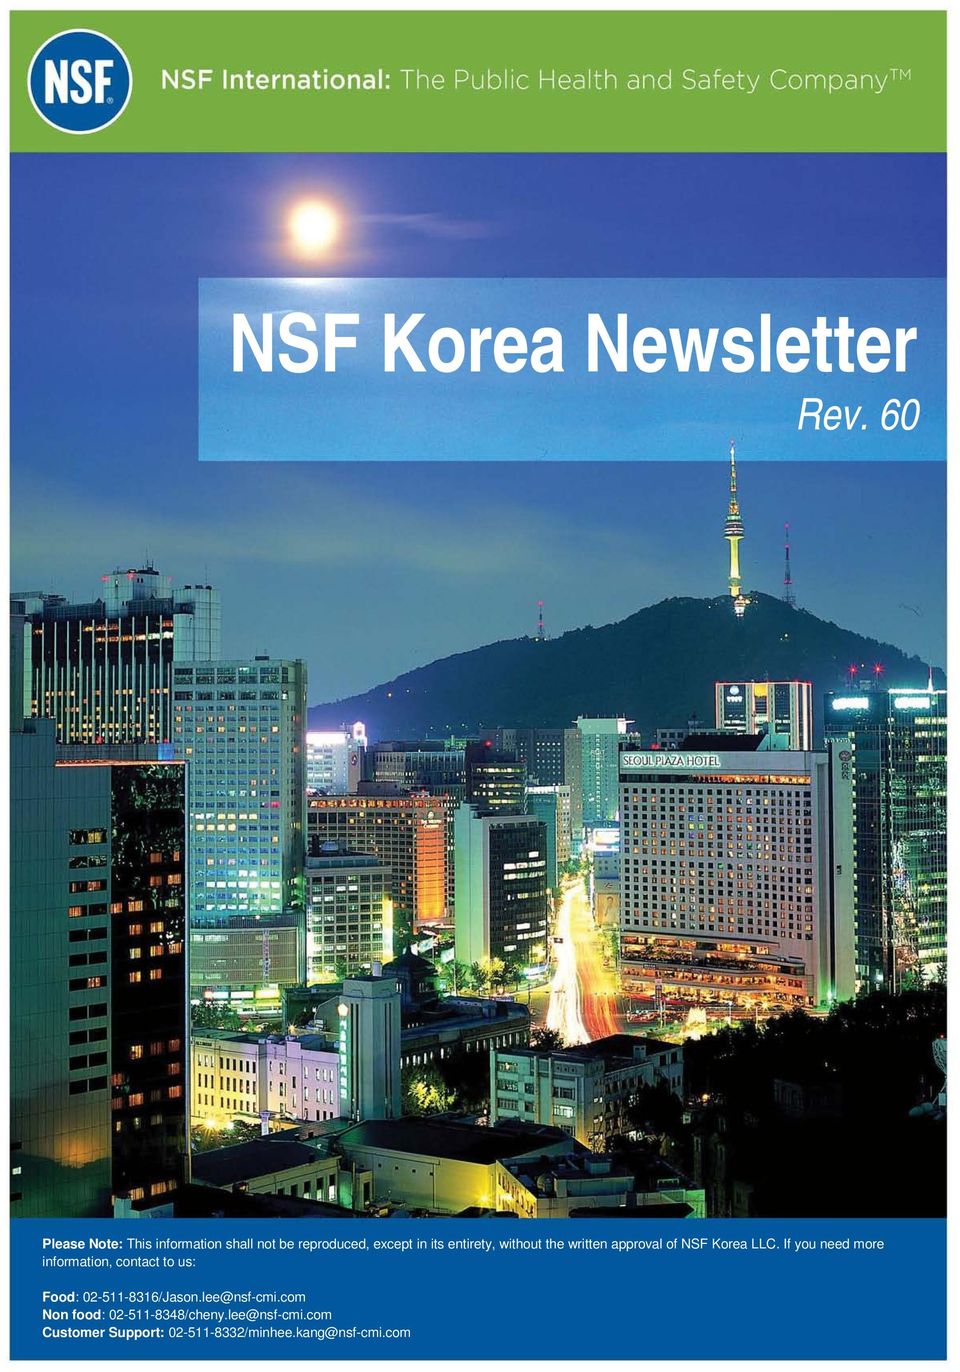 without the written approval of NSF Korea LLC.